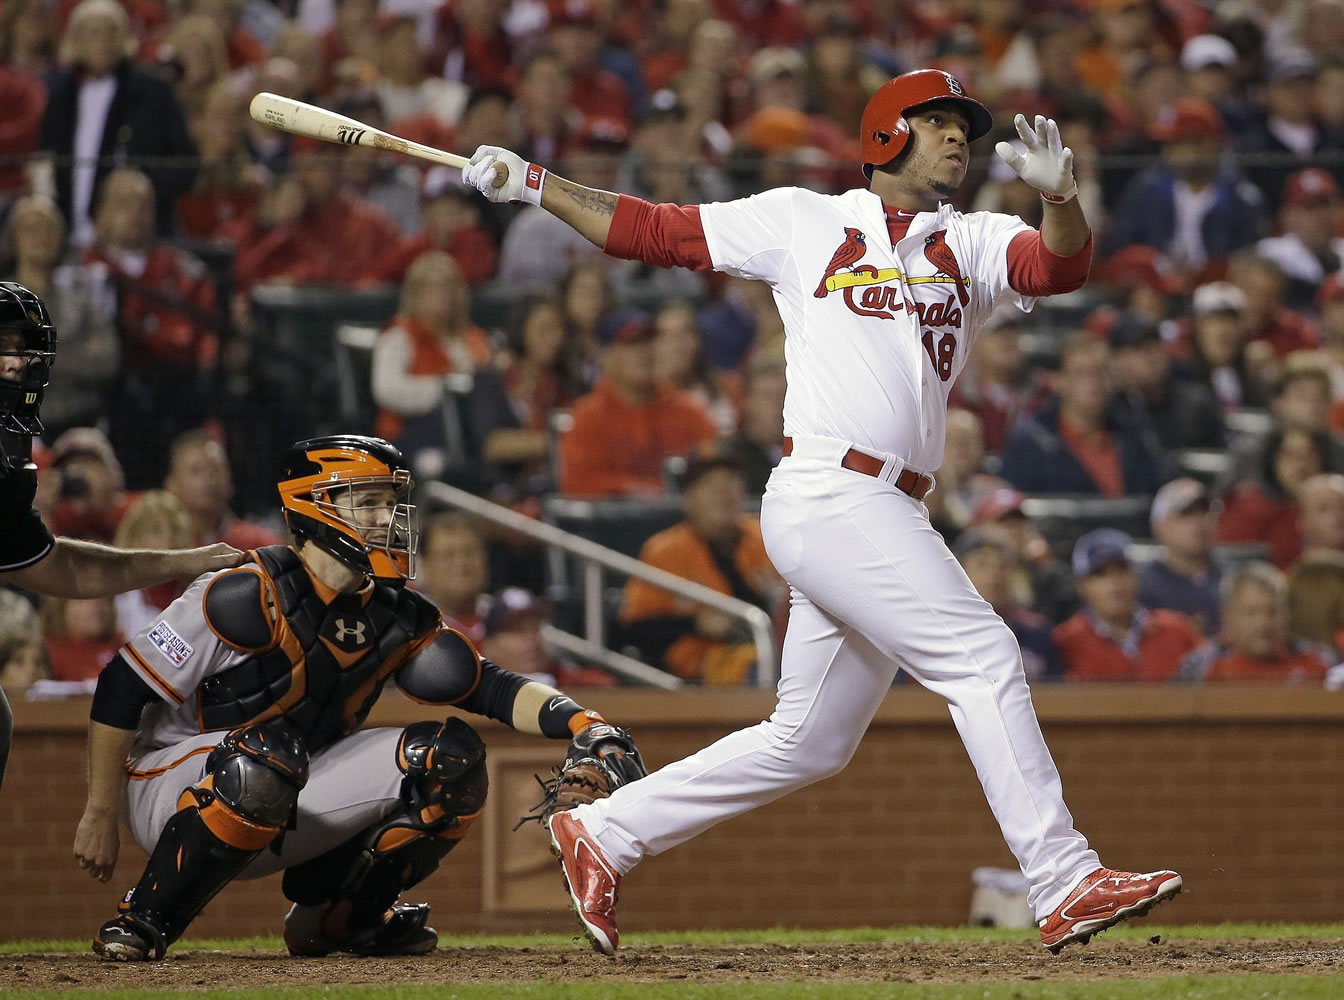 St. Louis Cardinals' Oscar Taveras hitting a home run during the seventh inning of Game 2 of the National League baseball championship series against the San Francisco Giants on Oct. 12, 2014. Authorities say, Sunday, Oct. 26, 2014, Taveras died in a car accident in the Dominican Republic. (AP Photo/David J.